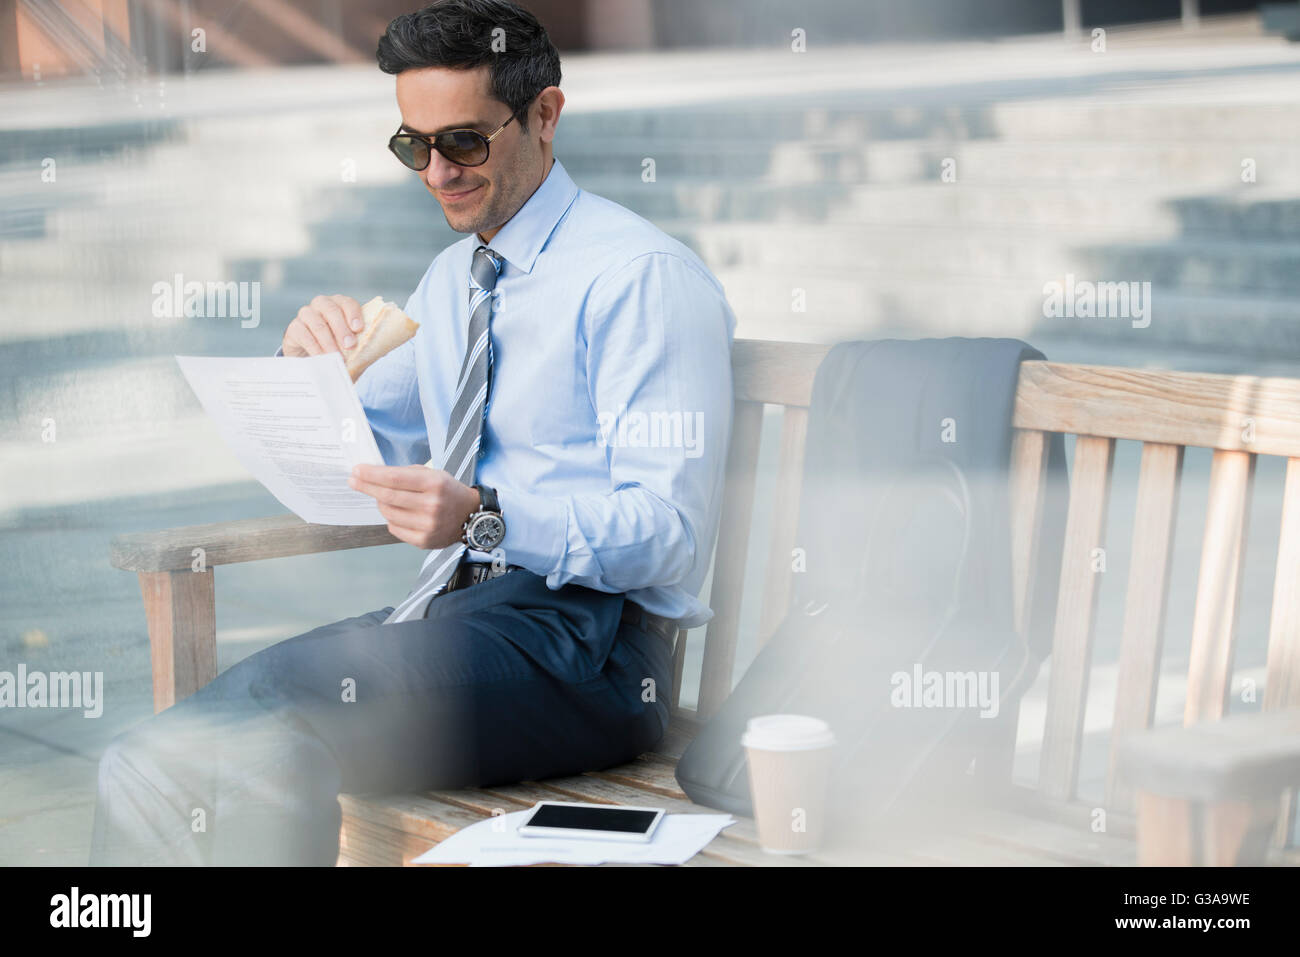 Corporate businessman eating lunch and working on bench Stock Photo